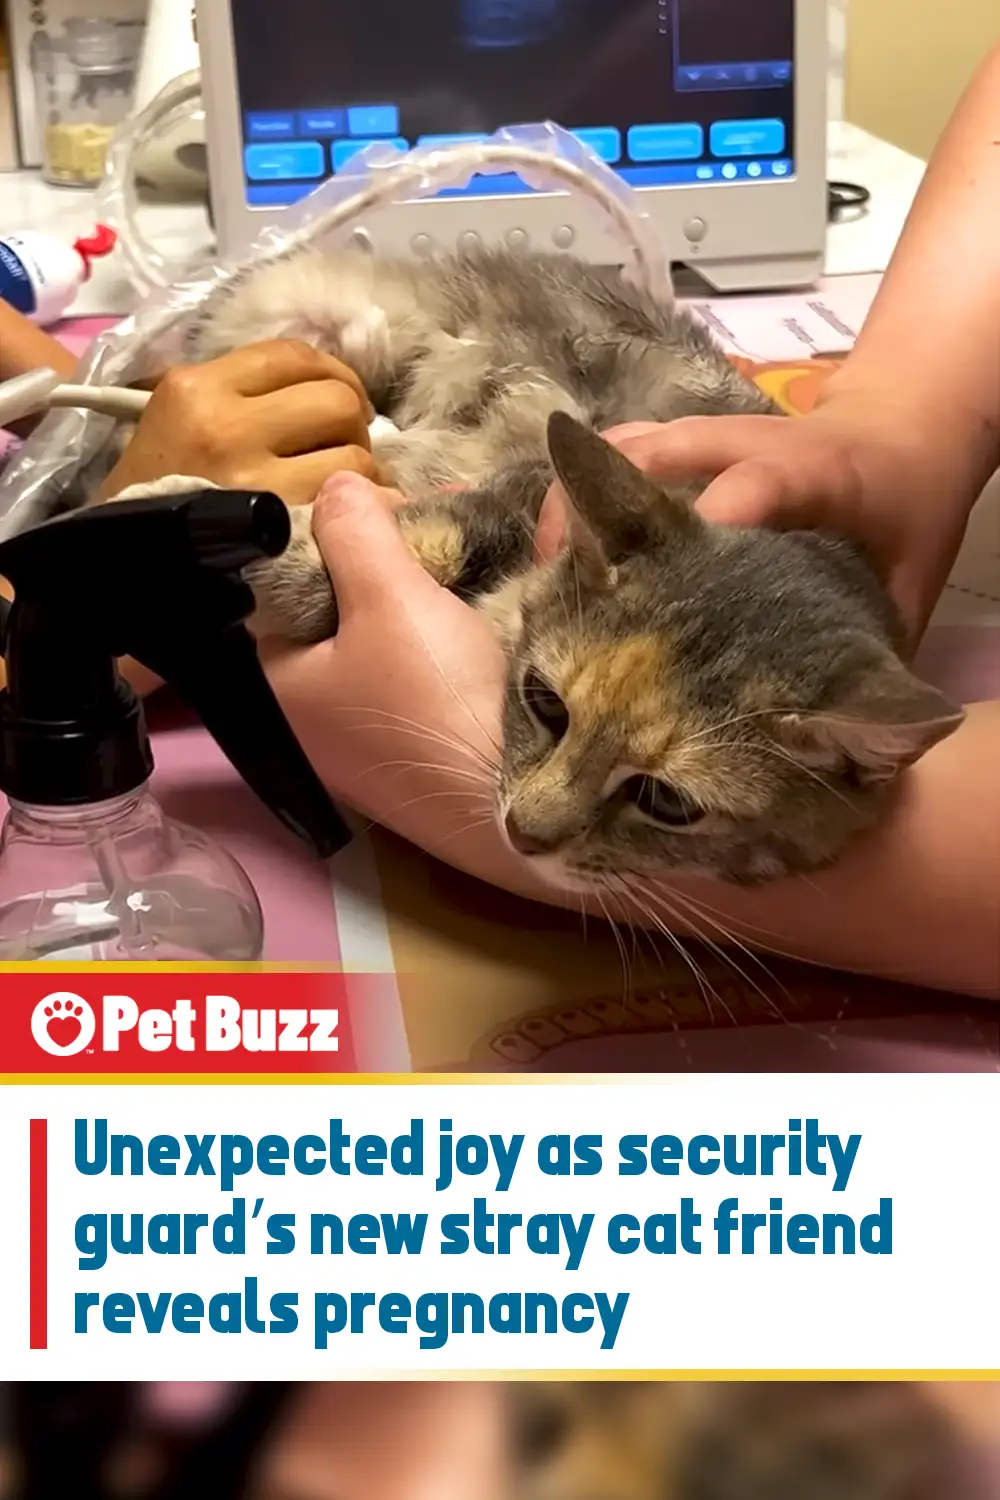 Unexpected joy as security guard’s new stray cat friend reveals pregnancy